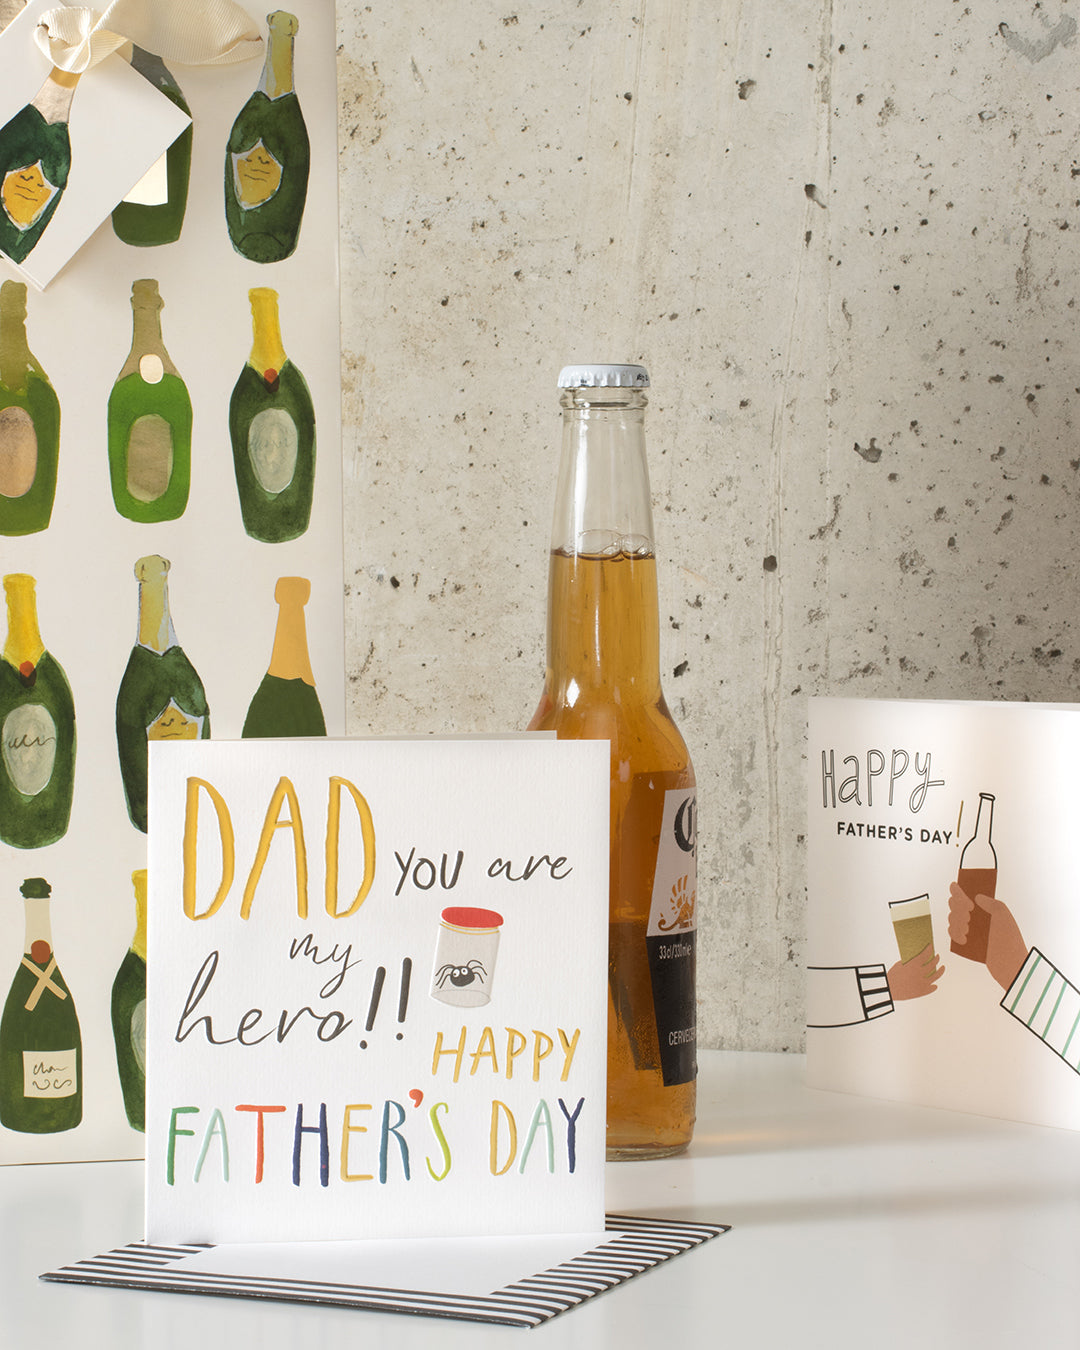 What to write in a Father's Day card